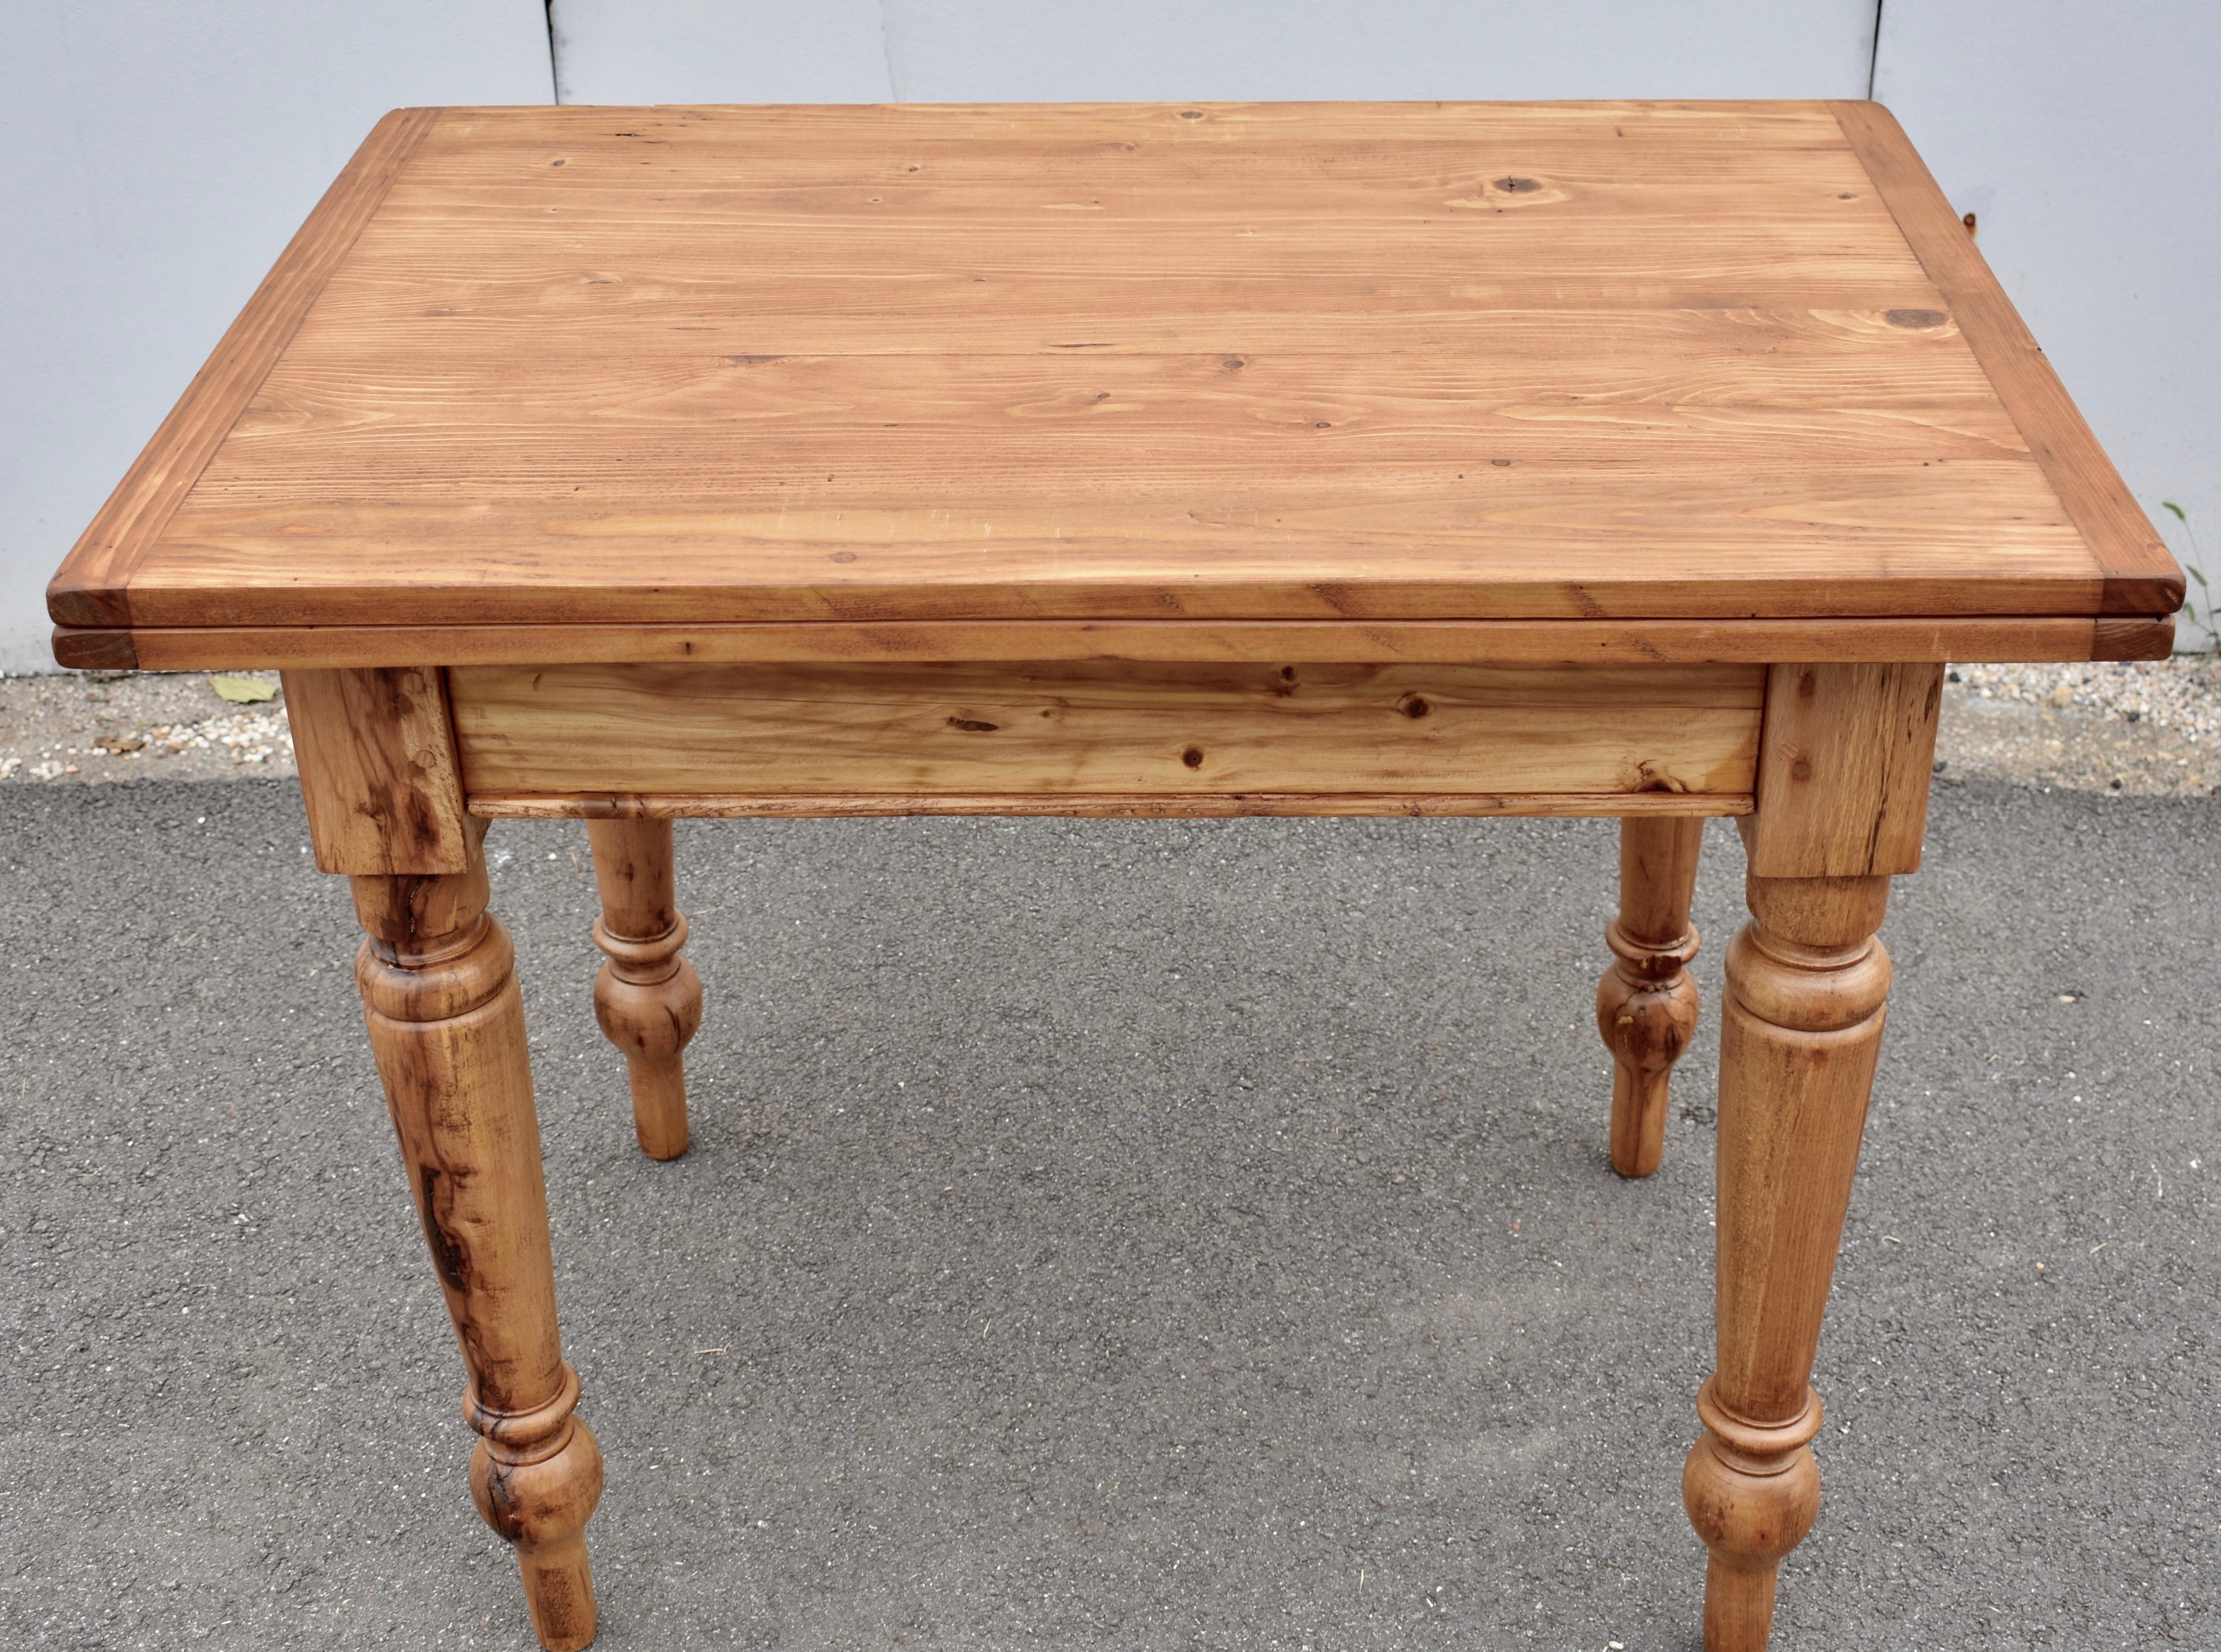 26VJL72a Pine Turned Leg Swivel-Top Table 39”Wx28”Dx32”H (56”x39” open) Hungary, circa 1920 $1250.00
Like its cousins the drawleaf and the dropleaf , the swivel-top is another clever way of increasing the size of a table when circumstances require